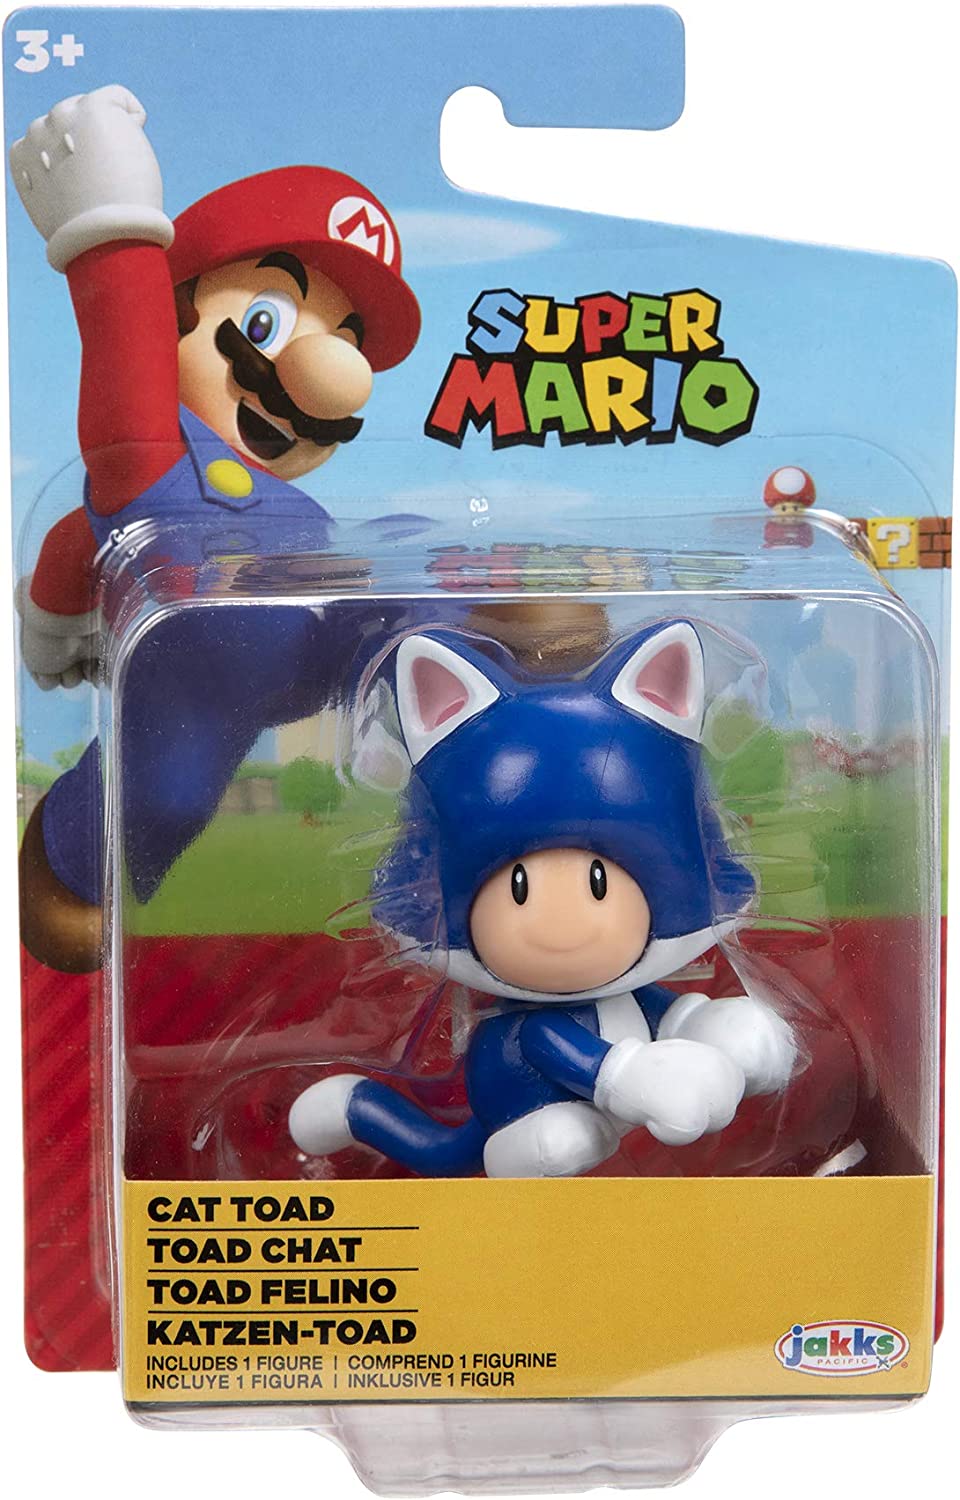 World of Nintendo 2.5" Cat Toad Action Figure